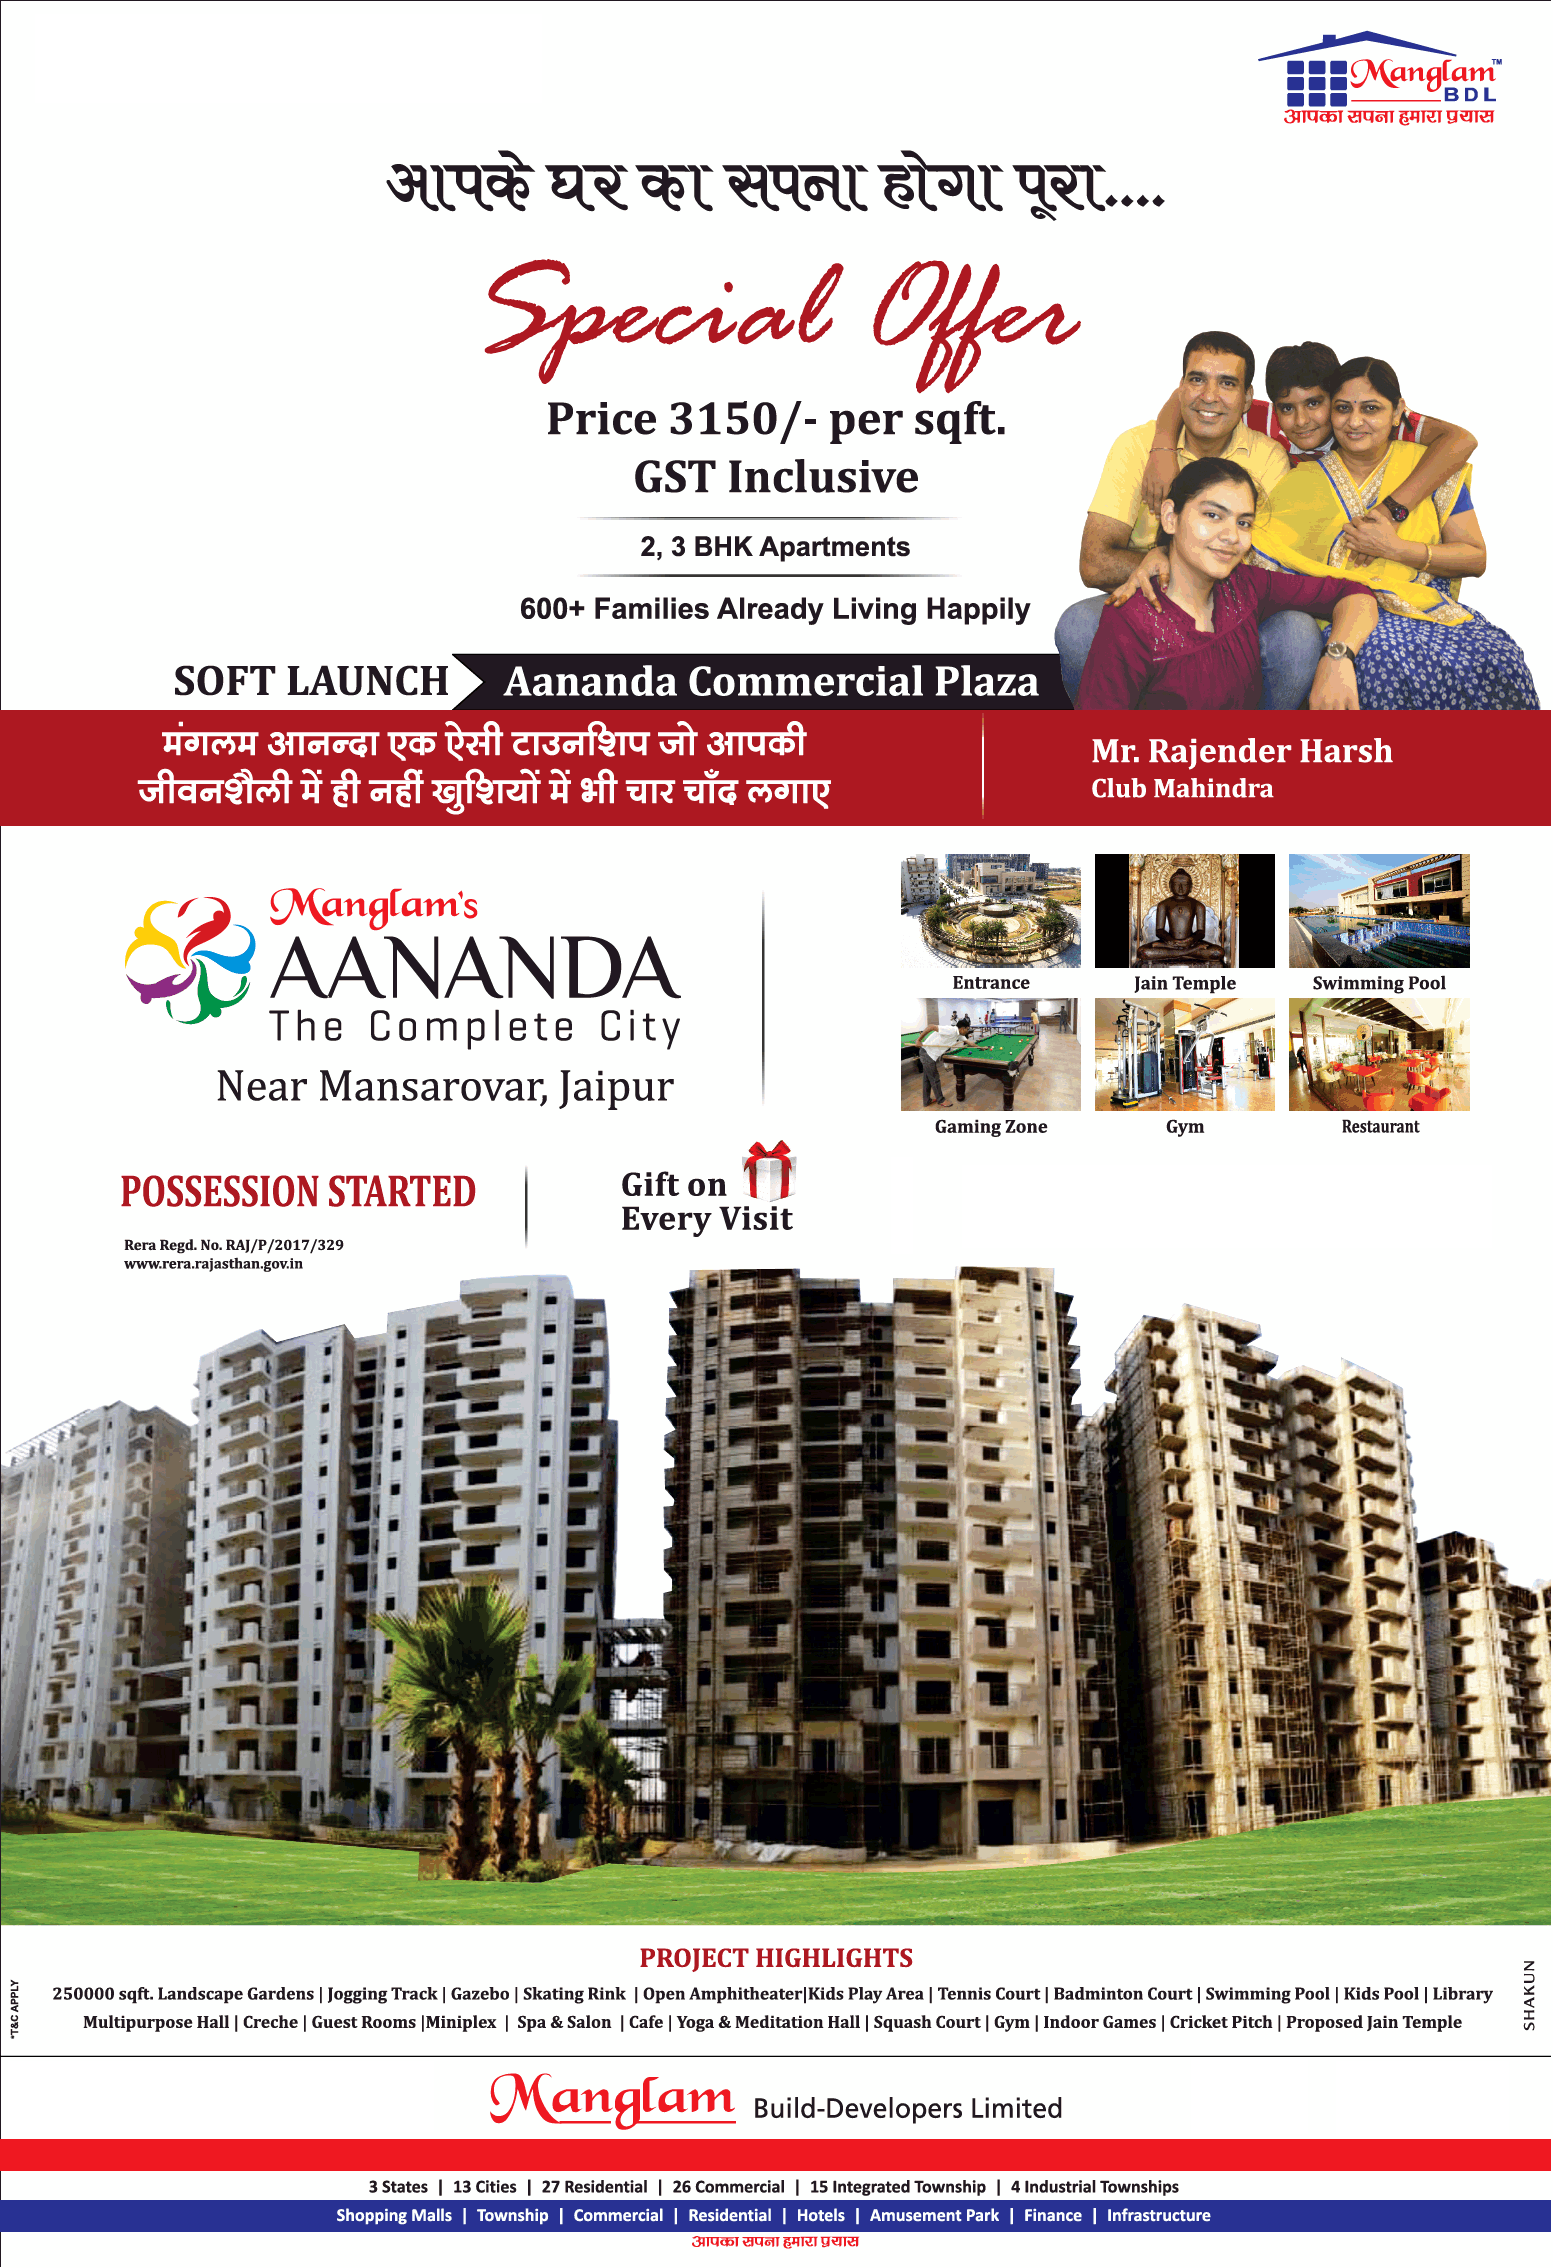 Avail special offer price for 2 & 3 bhk at Rs. 3150 per sq.ft. at Manglam Aananda in Jaipur